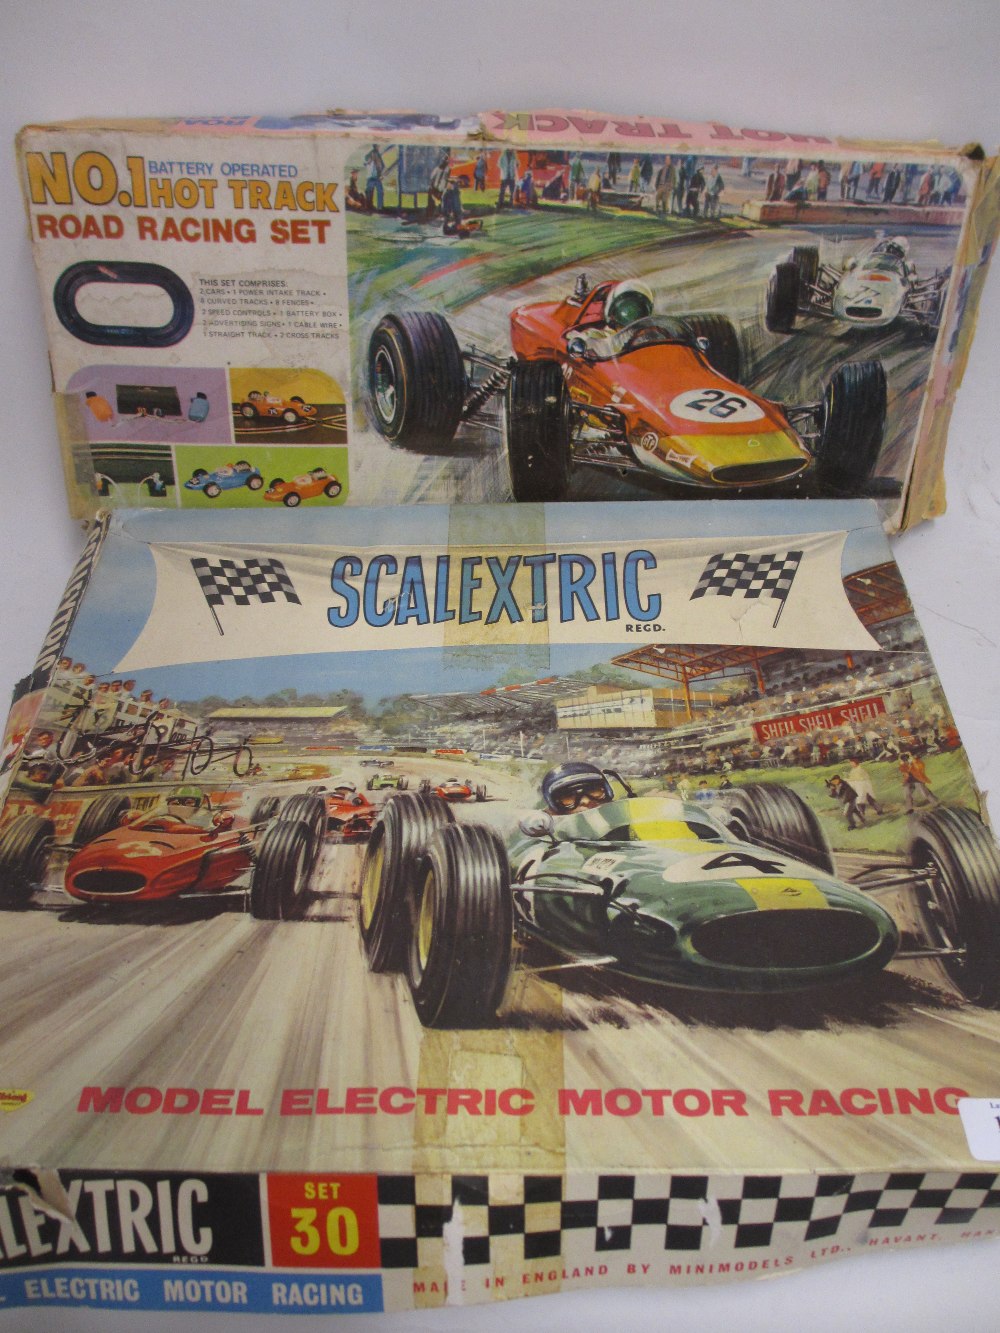 Scalextric model electric motor racing set, No. 30 in original box (a/f), together with another,